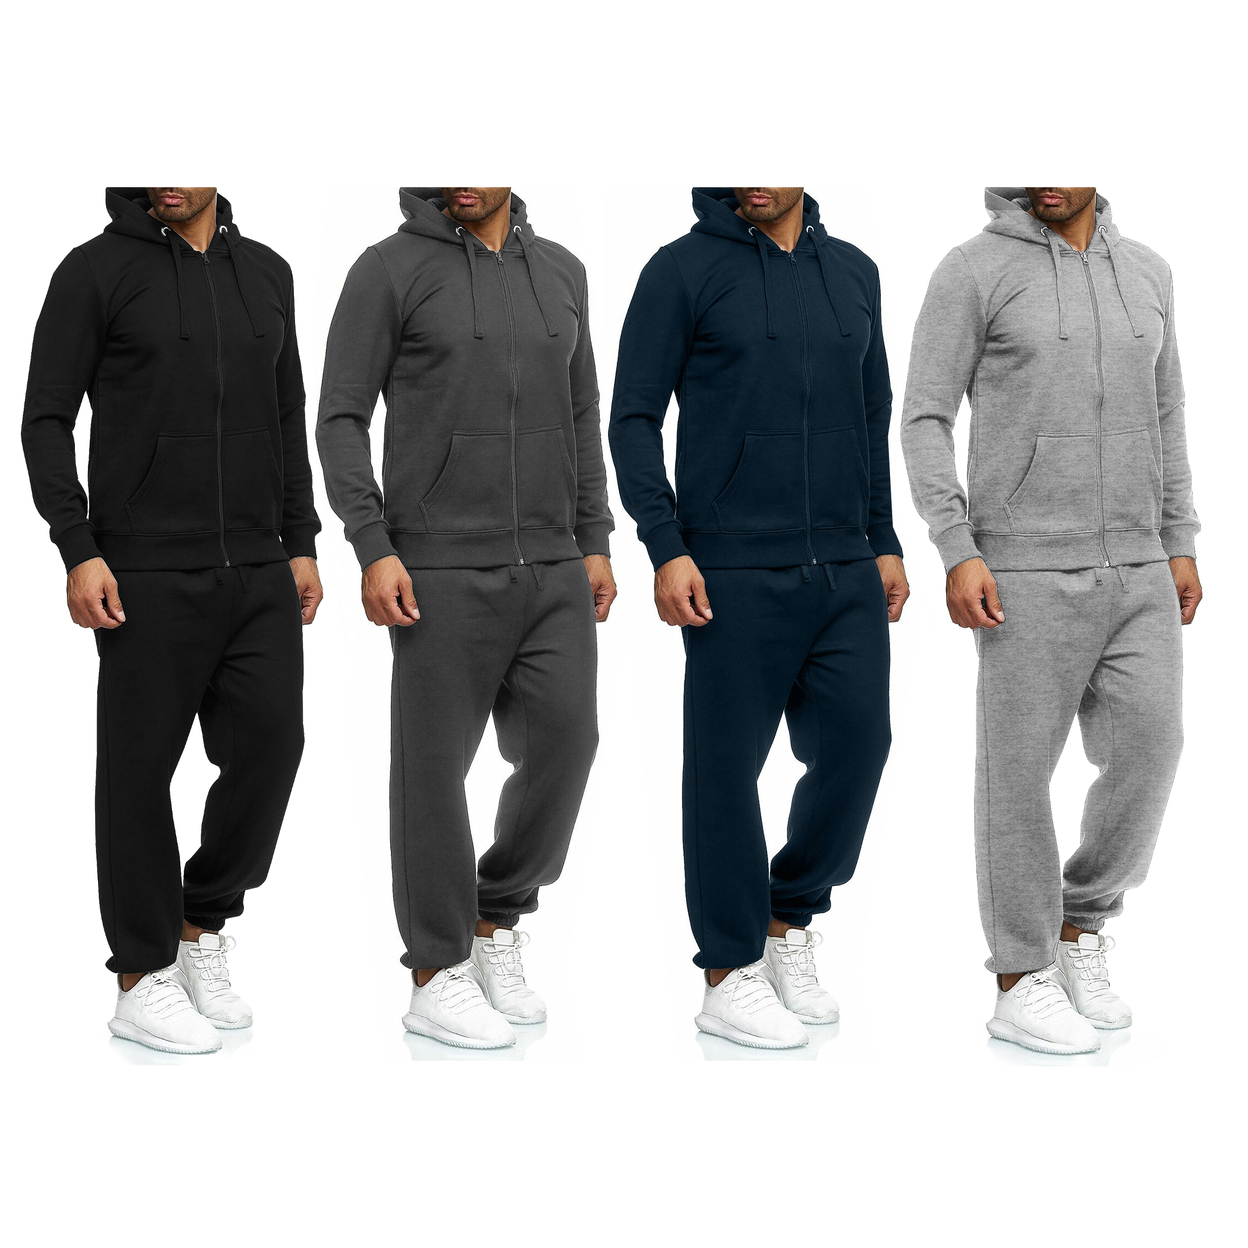 2-Pack: Men's Casual Big & Tall Athletic Active Winter Warm Fleece Lined Full Zip Tracksuit Jogger Set - Navy, X-large